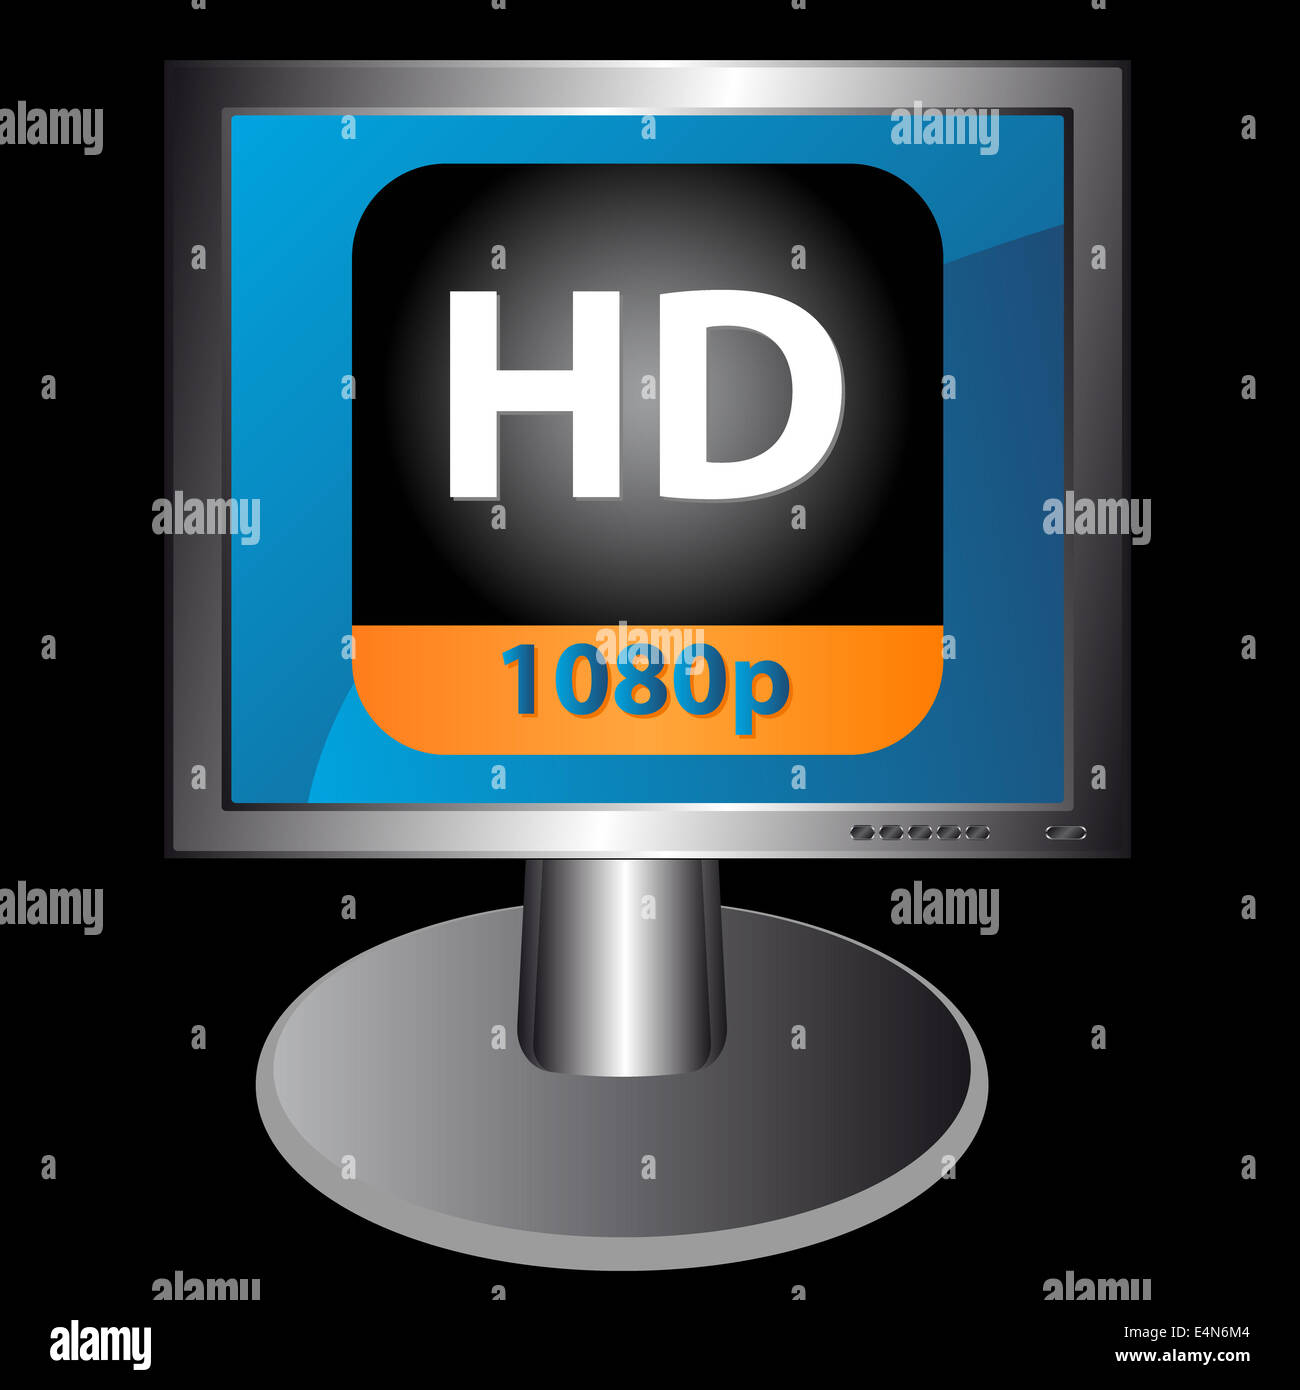 Hd icon in monitor Stock Photo